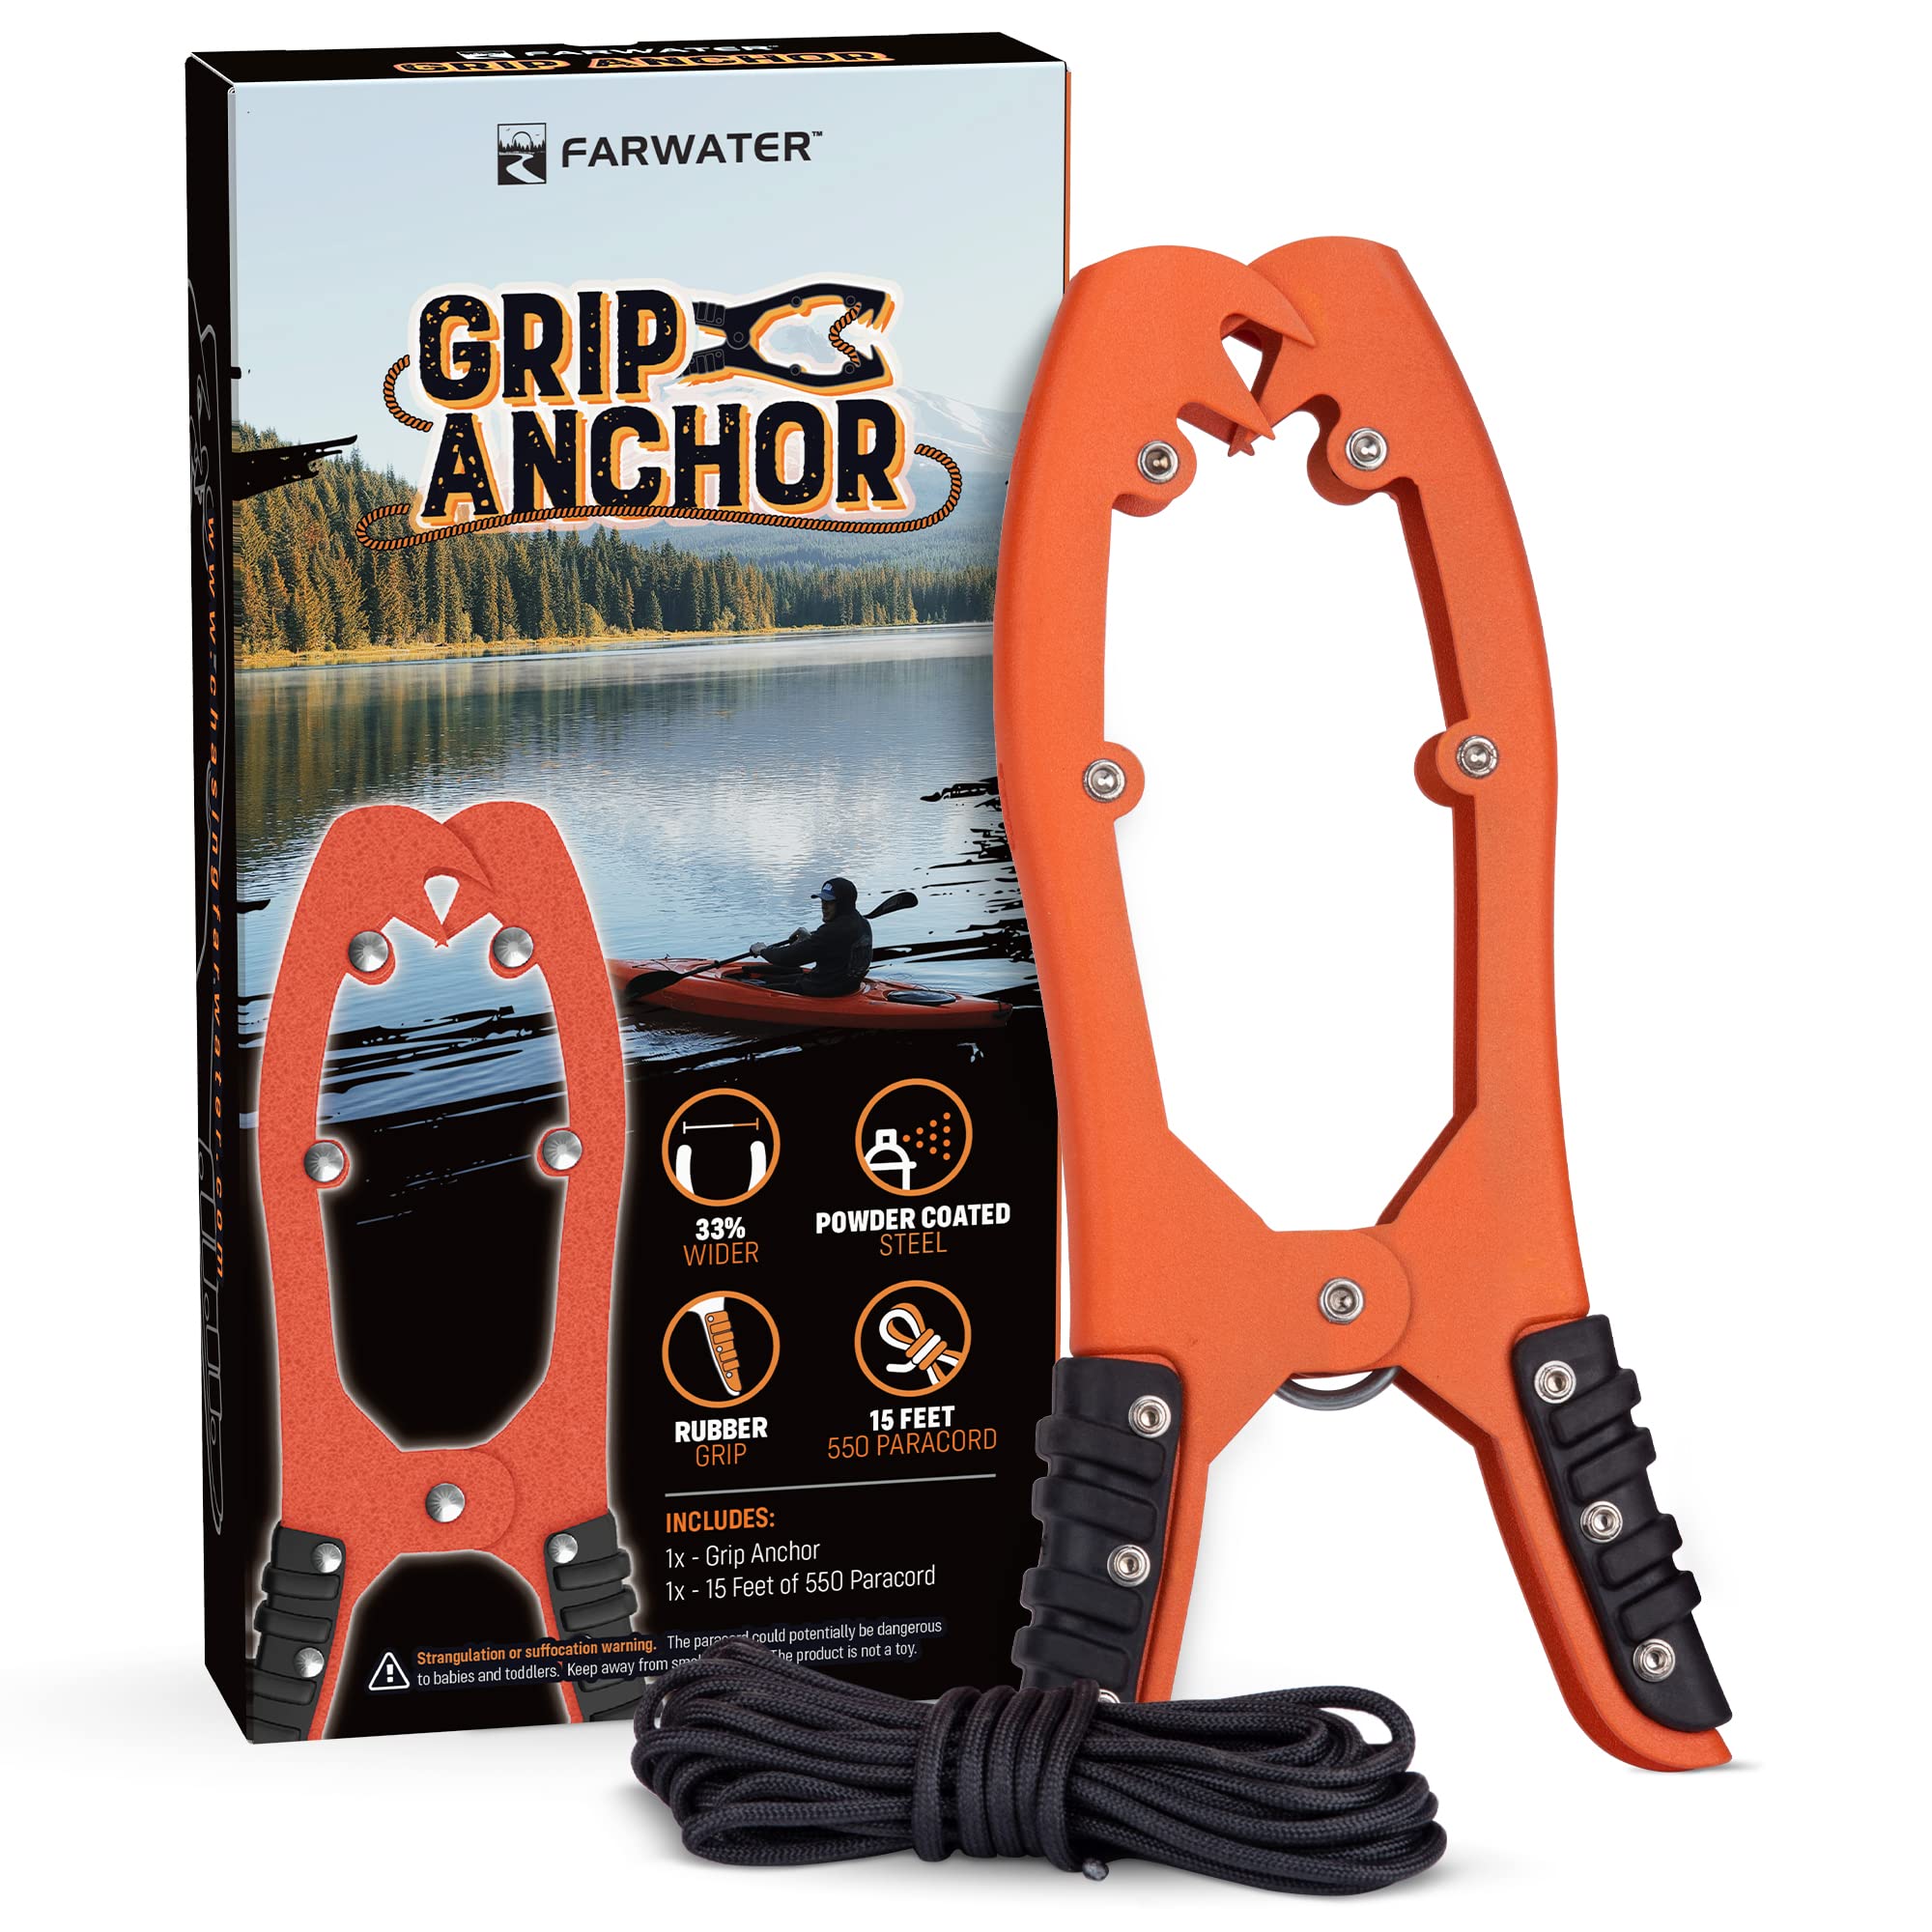 FARWATER Canoe Anchor Grip - Boat, Float Tube & Kayak Fishing Accessories,  Kayaking Equipment - Brush Clamp Anchor with Teeth - Gripper with 15ft  Paracord - Rubber Grips - Coated Steel - Orange